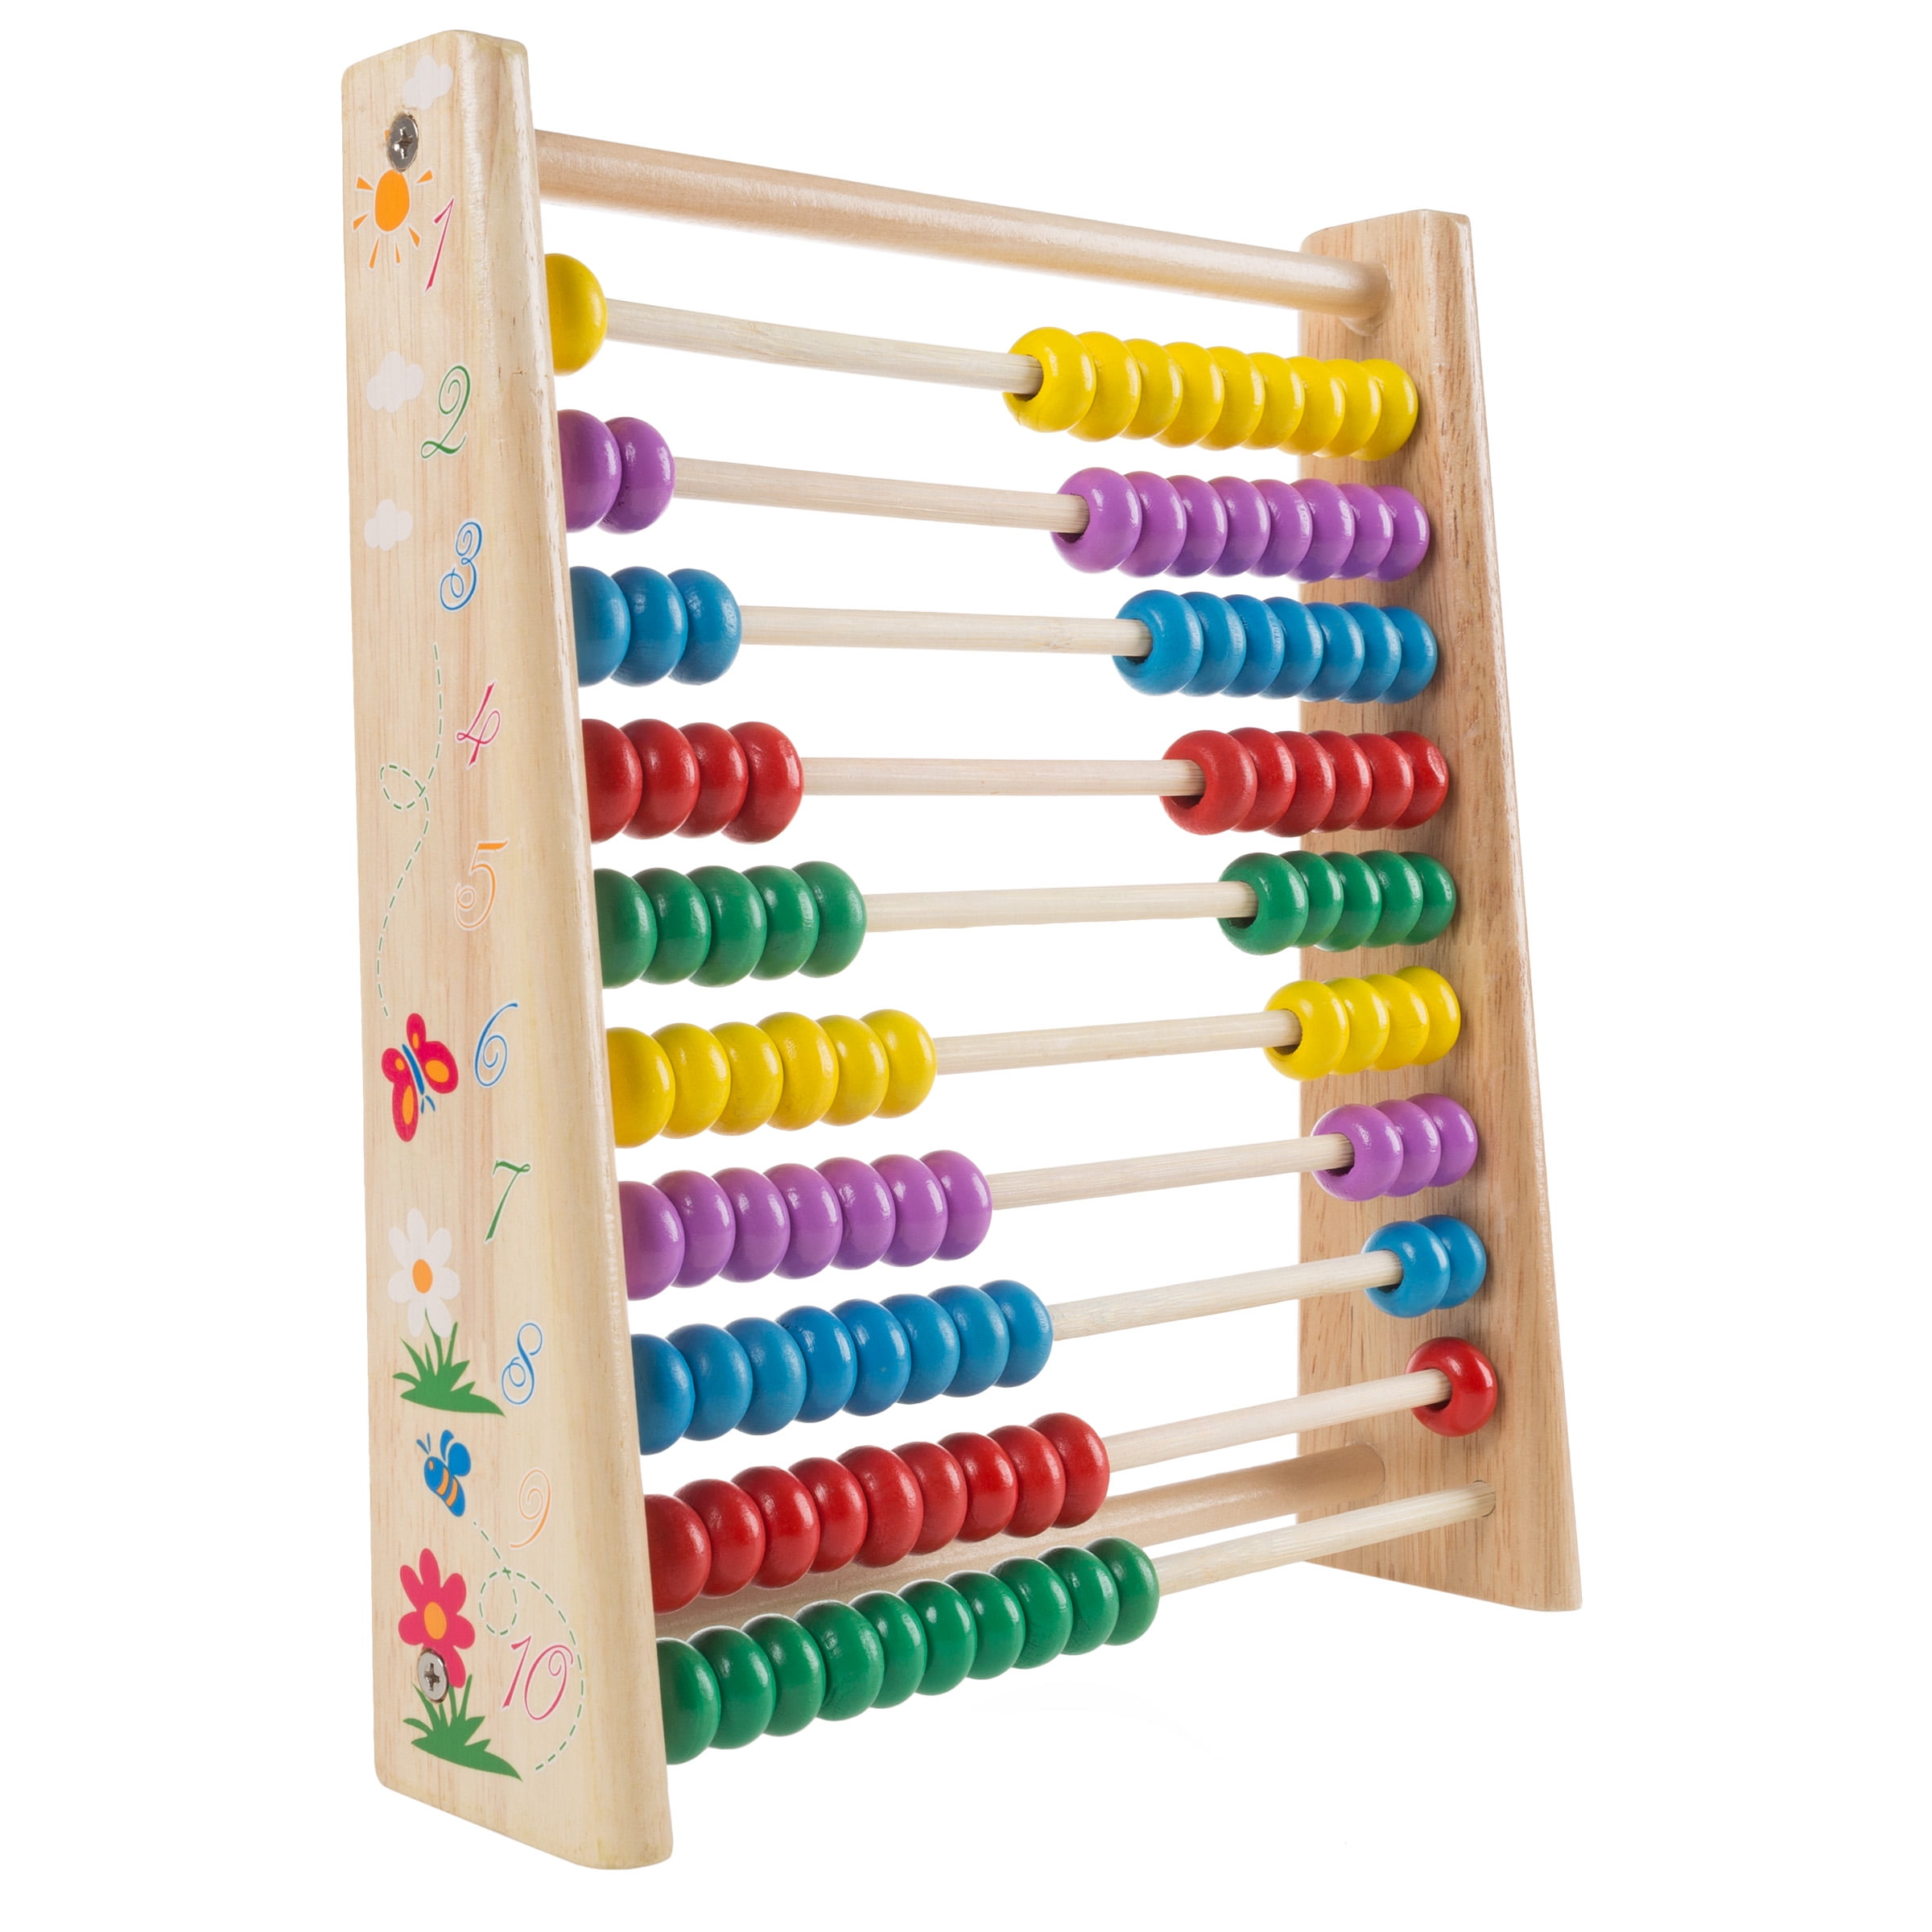 Wooden Abacus 100 Beads Counting Number Preschool Kid Math Learning Teaching 